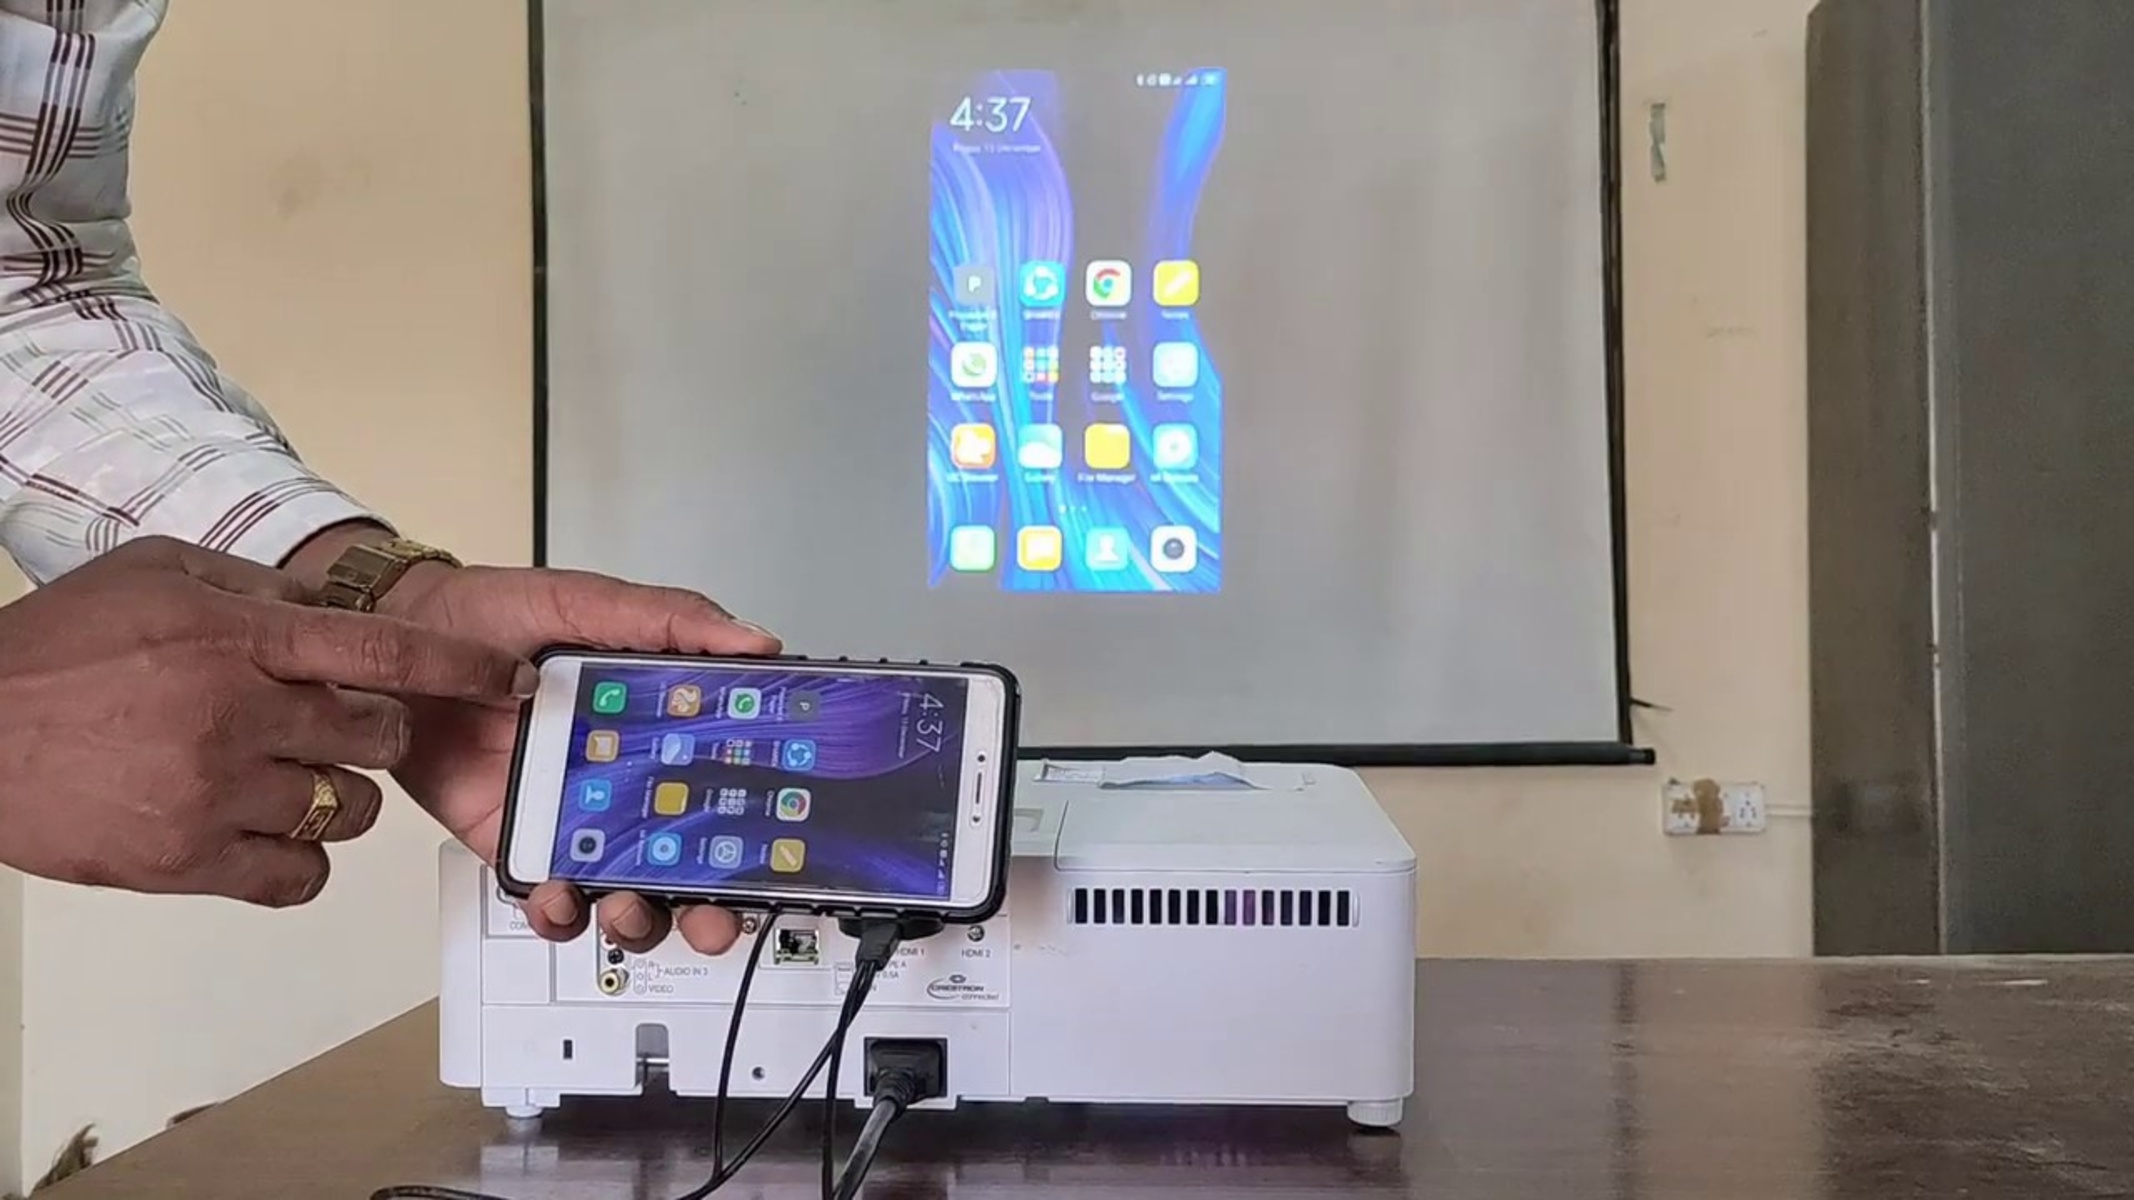 How To Connect Phone To Projector Using HDMI